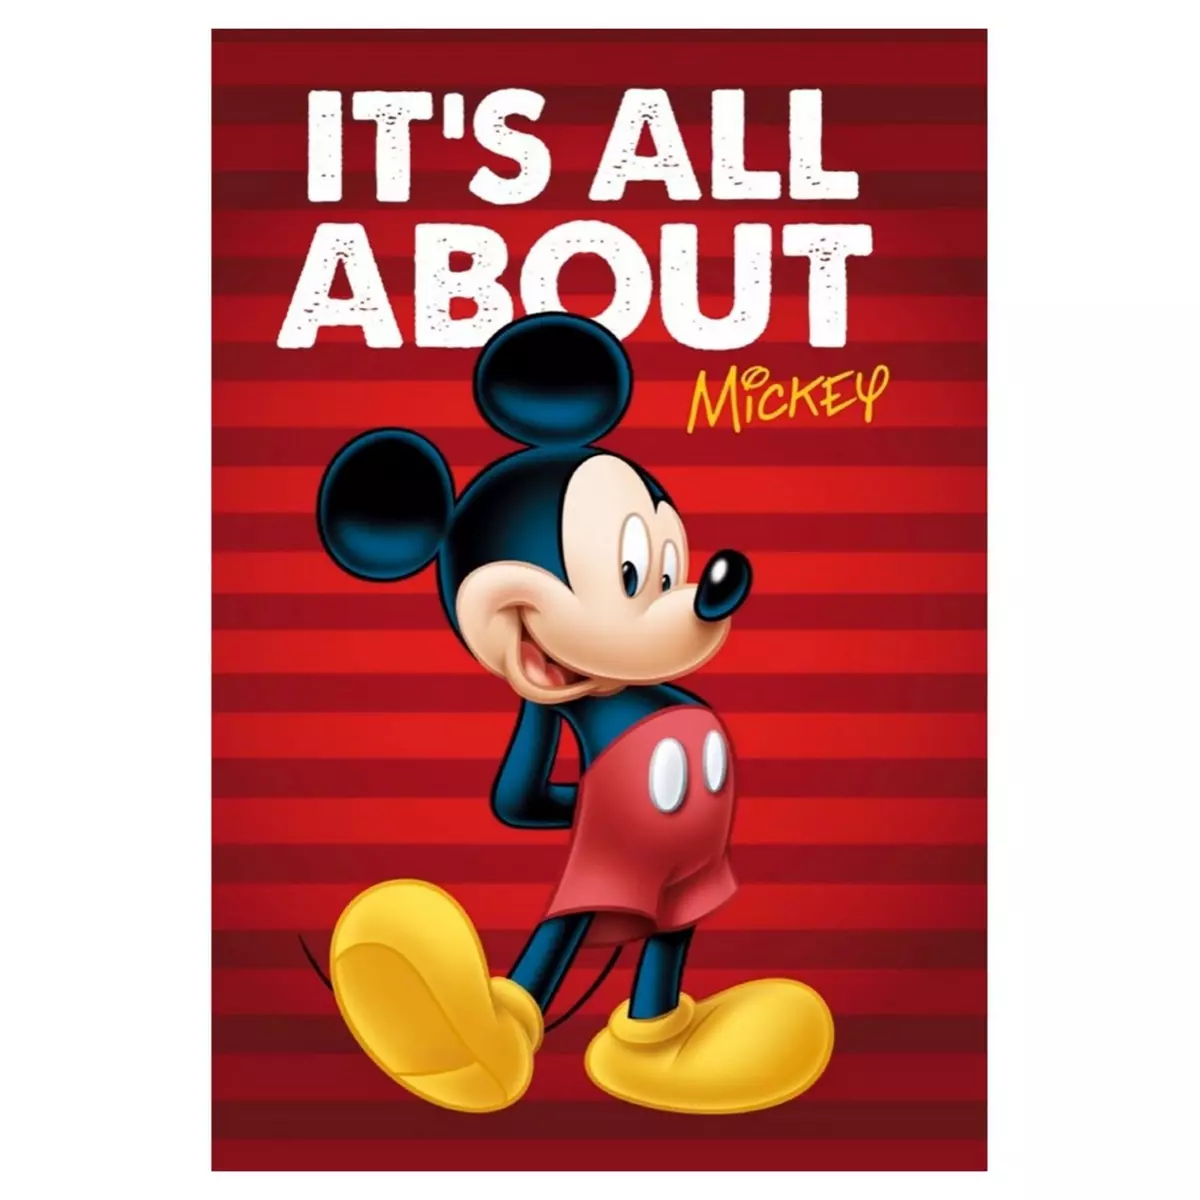 DISNEY Plaid polaire Mickey Mouse Couverture raye